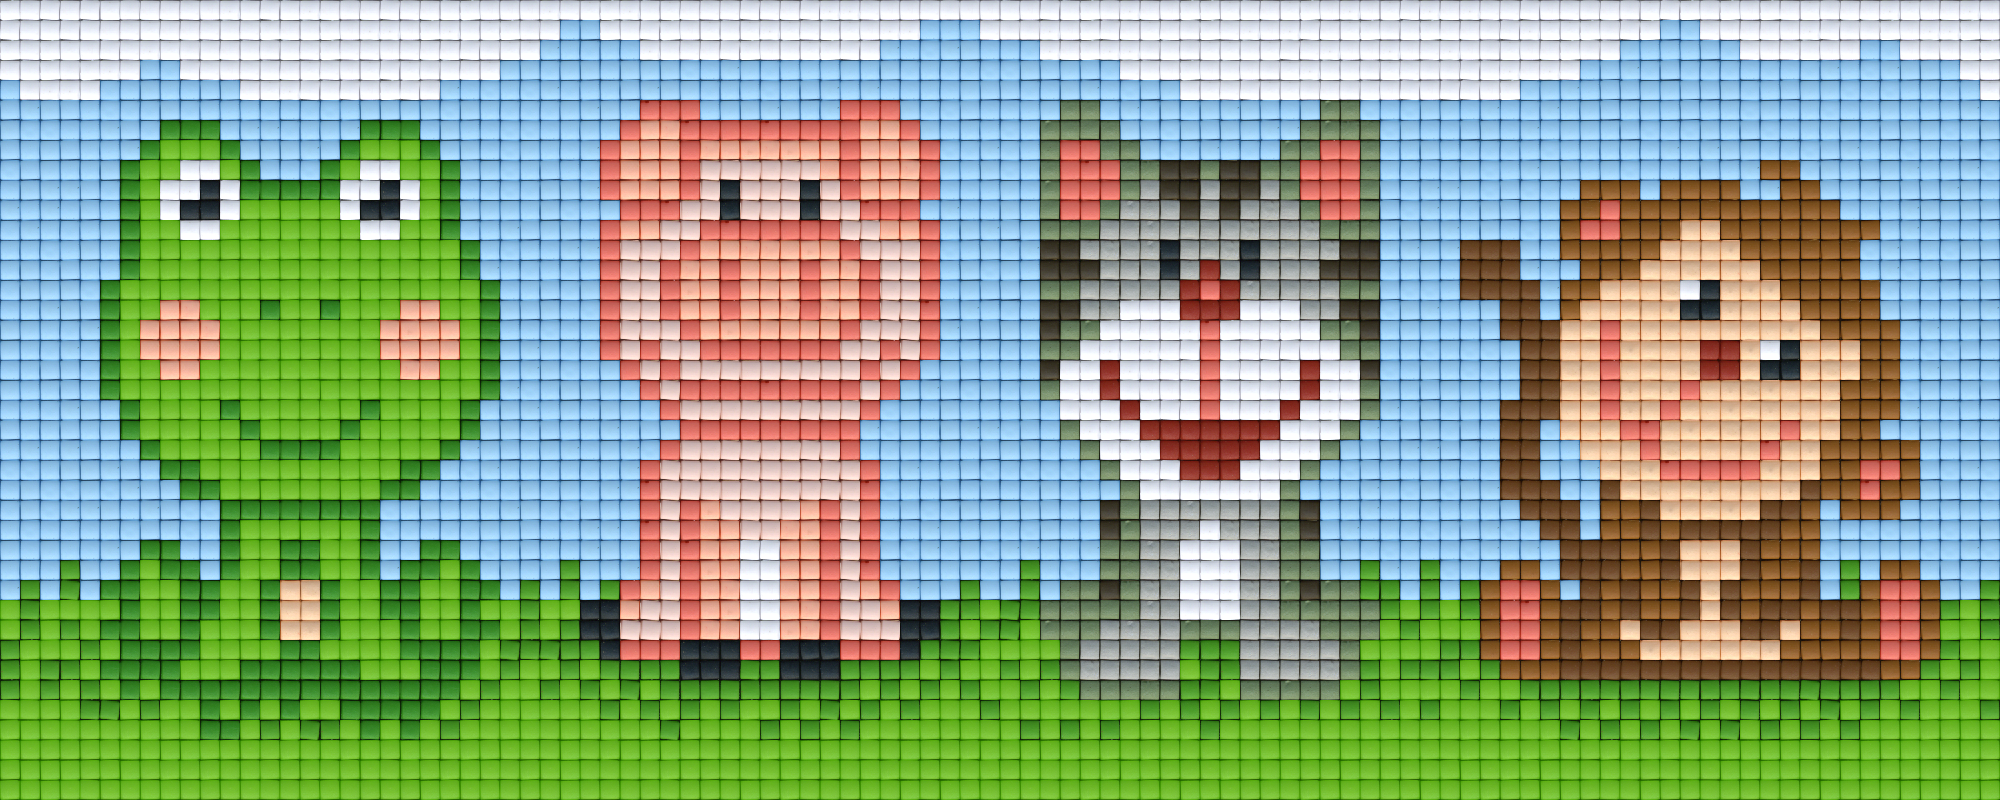 Pixel hobby classic template - animal friends